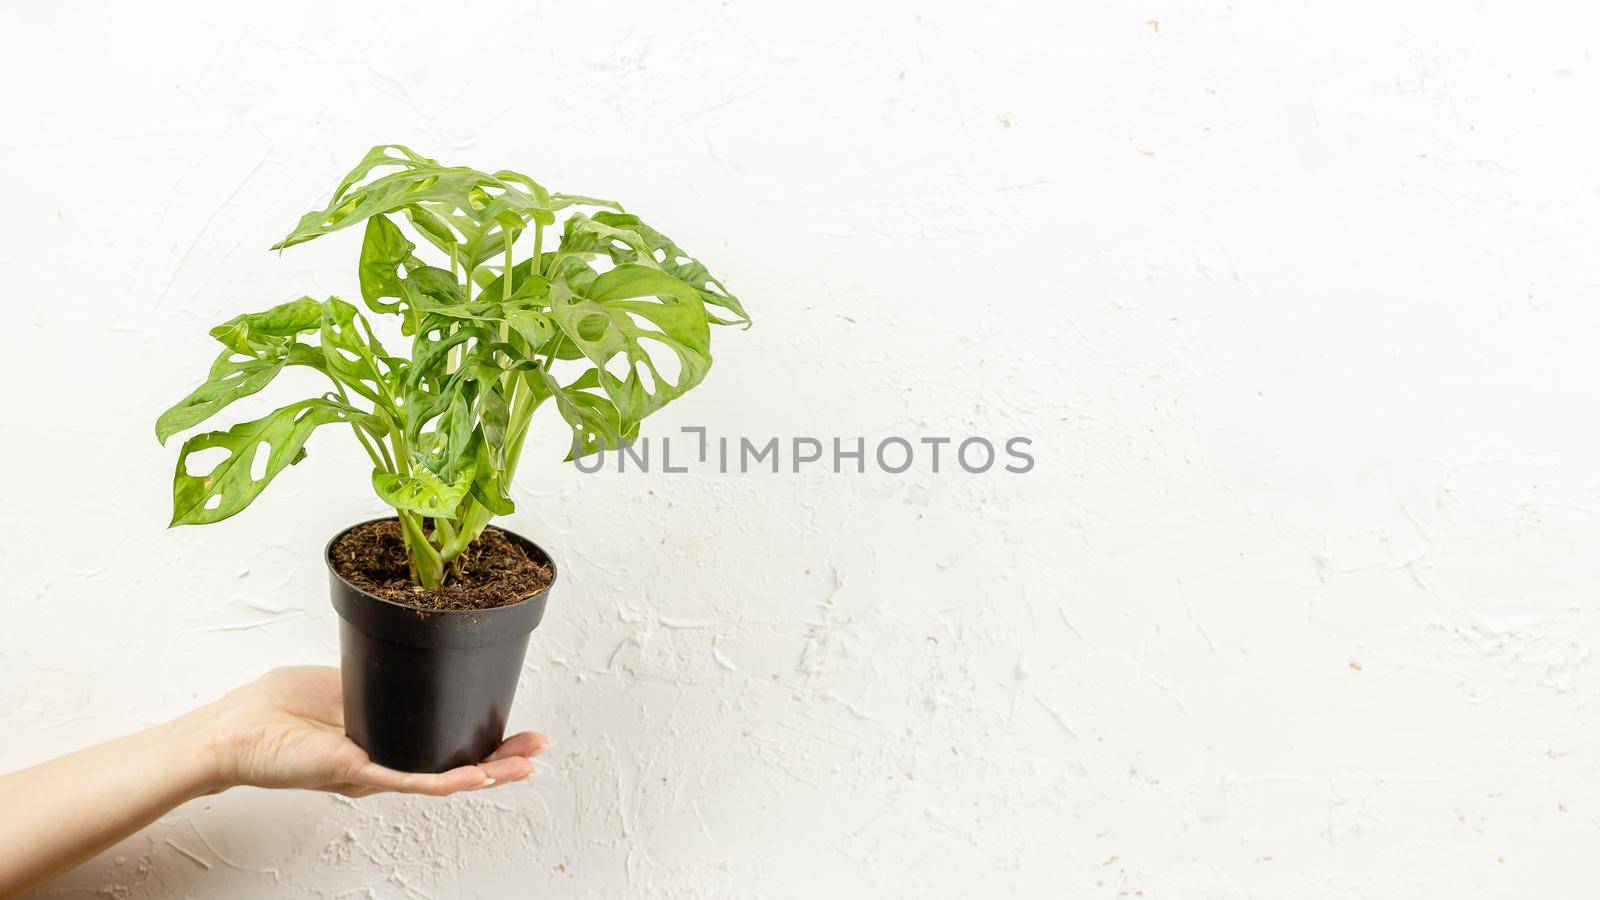 Monstera adonsonii, Hand holding Monkey Mask plant in the nursery pot over white wall, Concept of urban jungle, growing plants at home, copy space for text